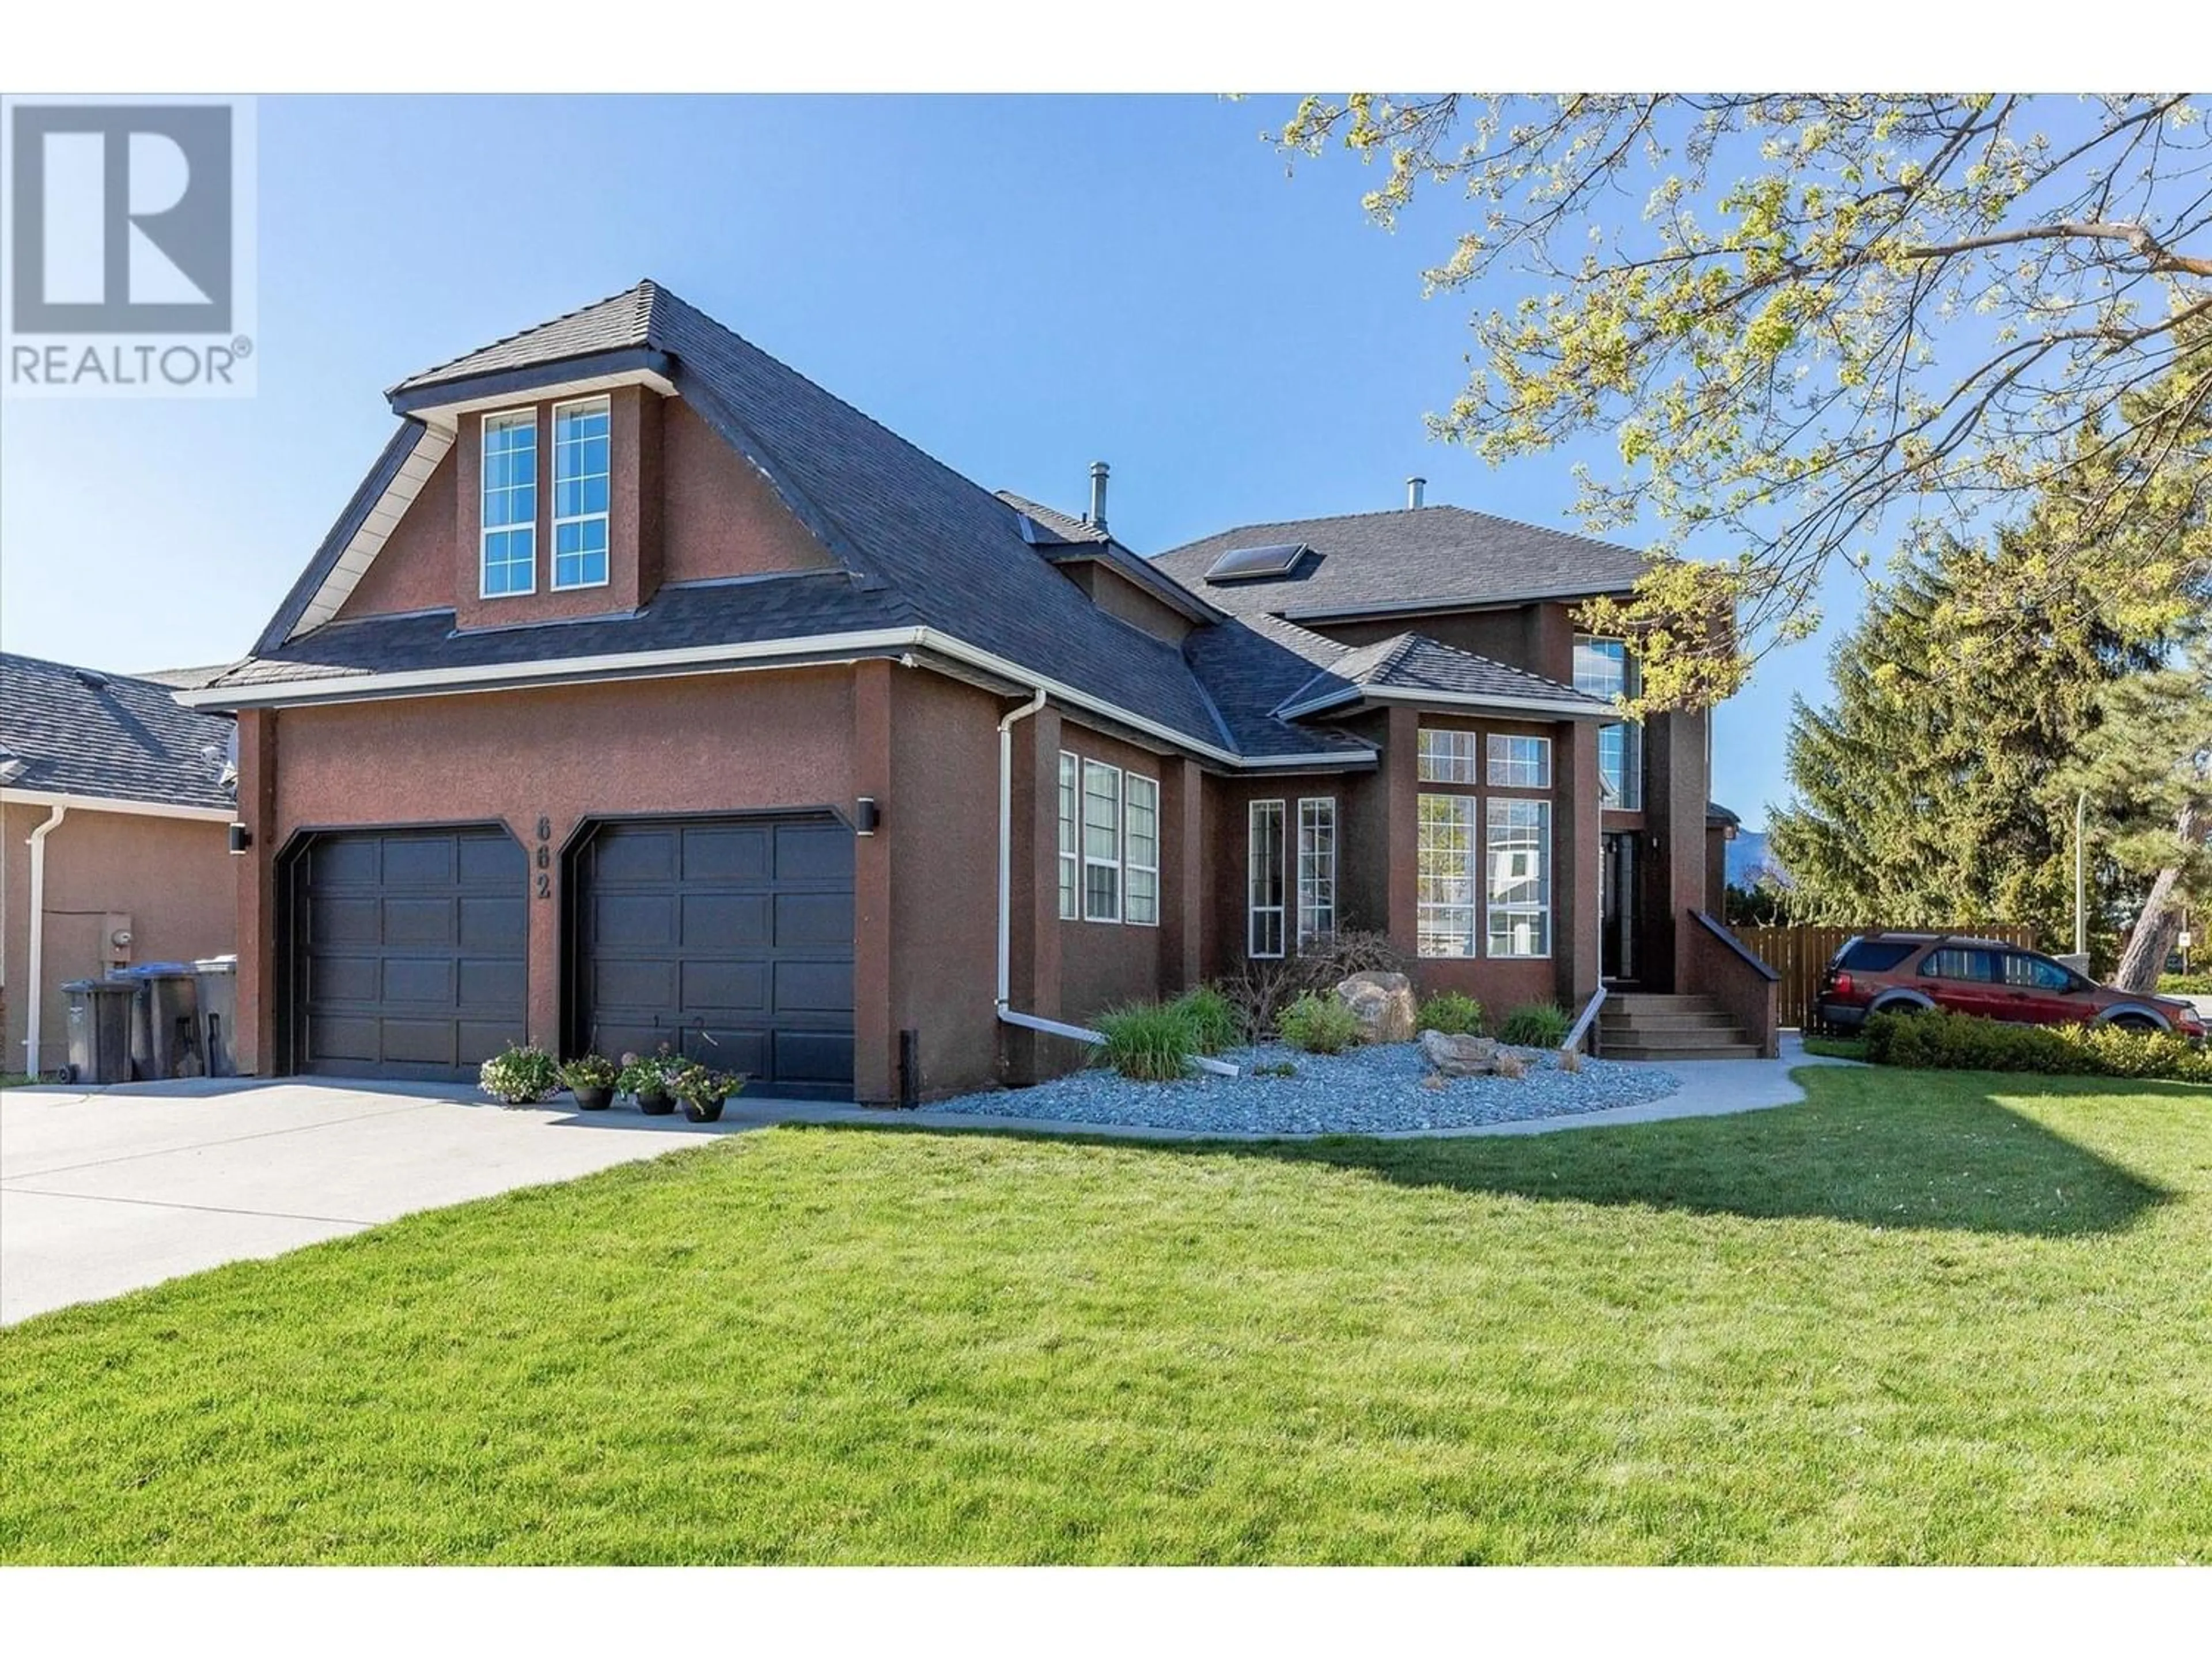 Home with brick exterior material for 662 Southwind Drive, Kelowna British Columbia V1W8G1